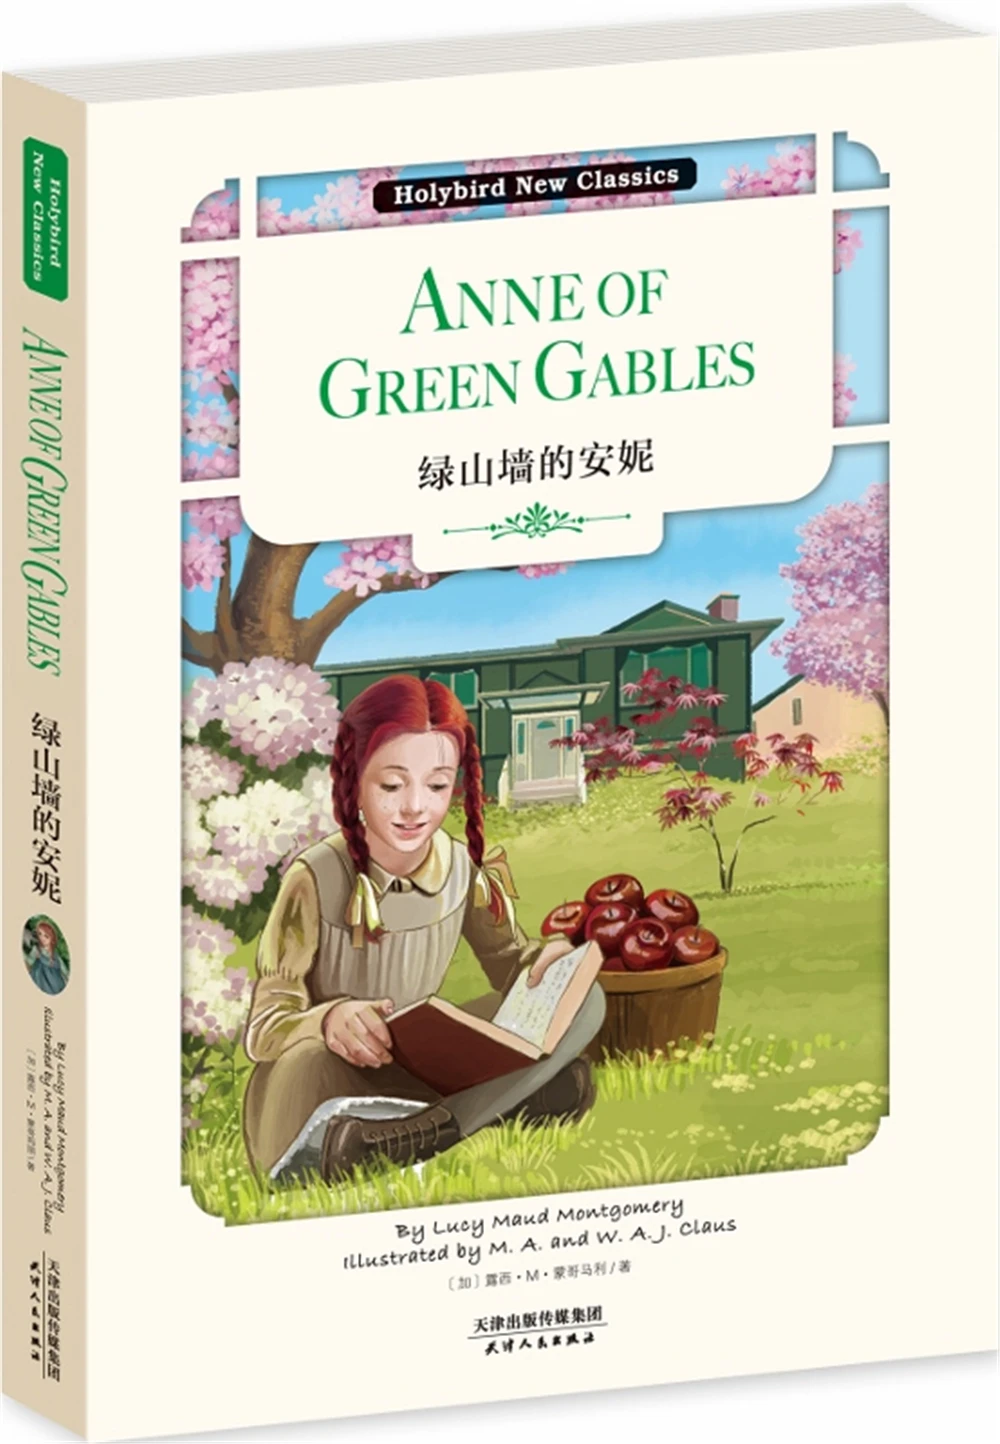 

Kids Boy Girl Educational English reading book Anne of Green Gables (English original) [Anne of Green Gables]